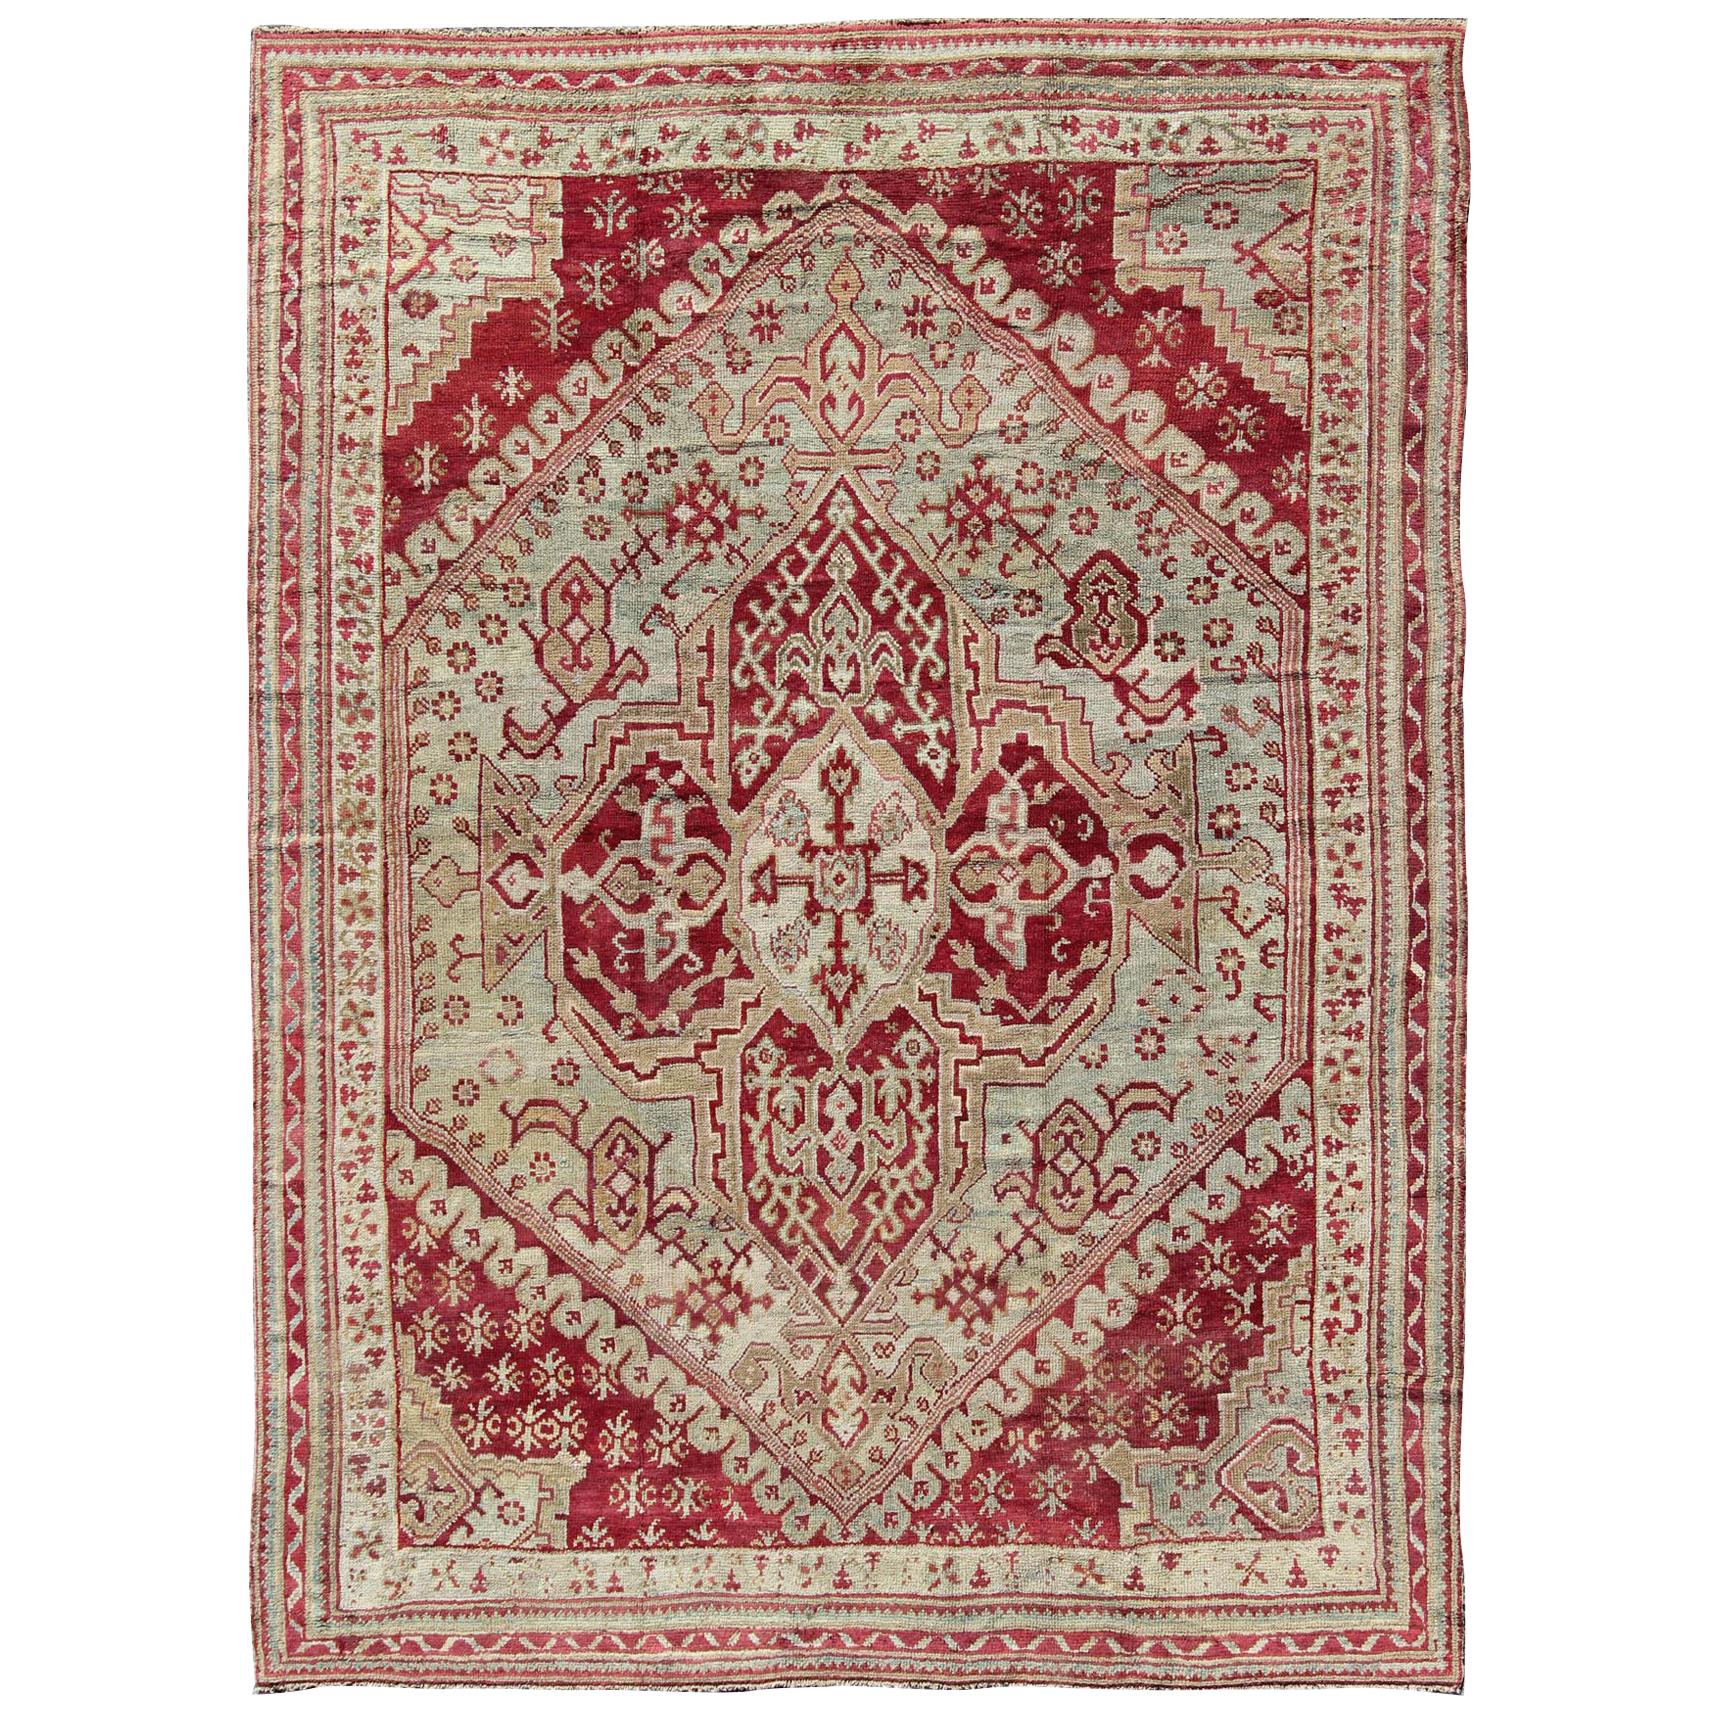 Antique Turkish Ghiordes 19th Century Rug in Raspberry Red, Ice Blue & L. Green For Sale